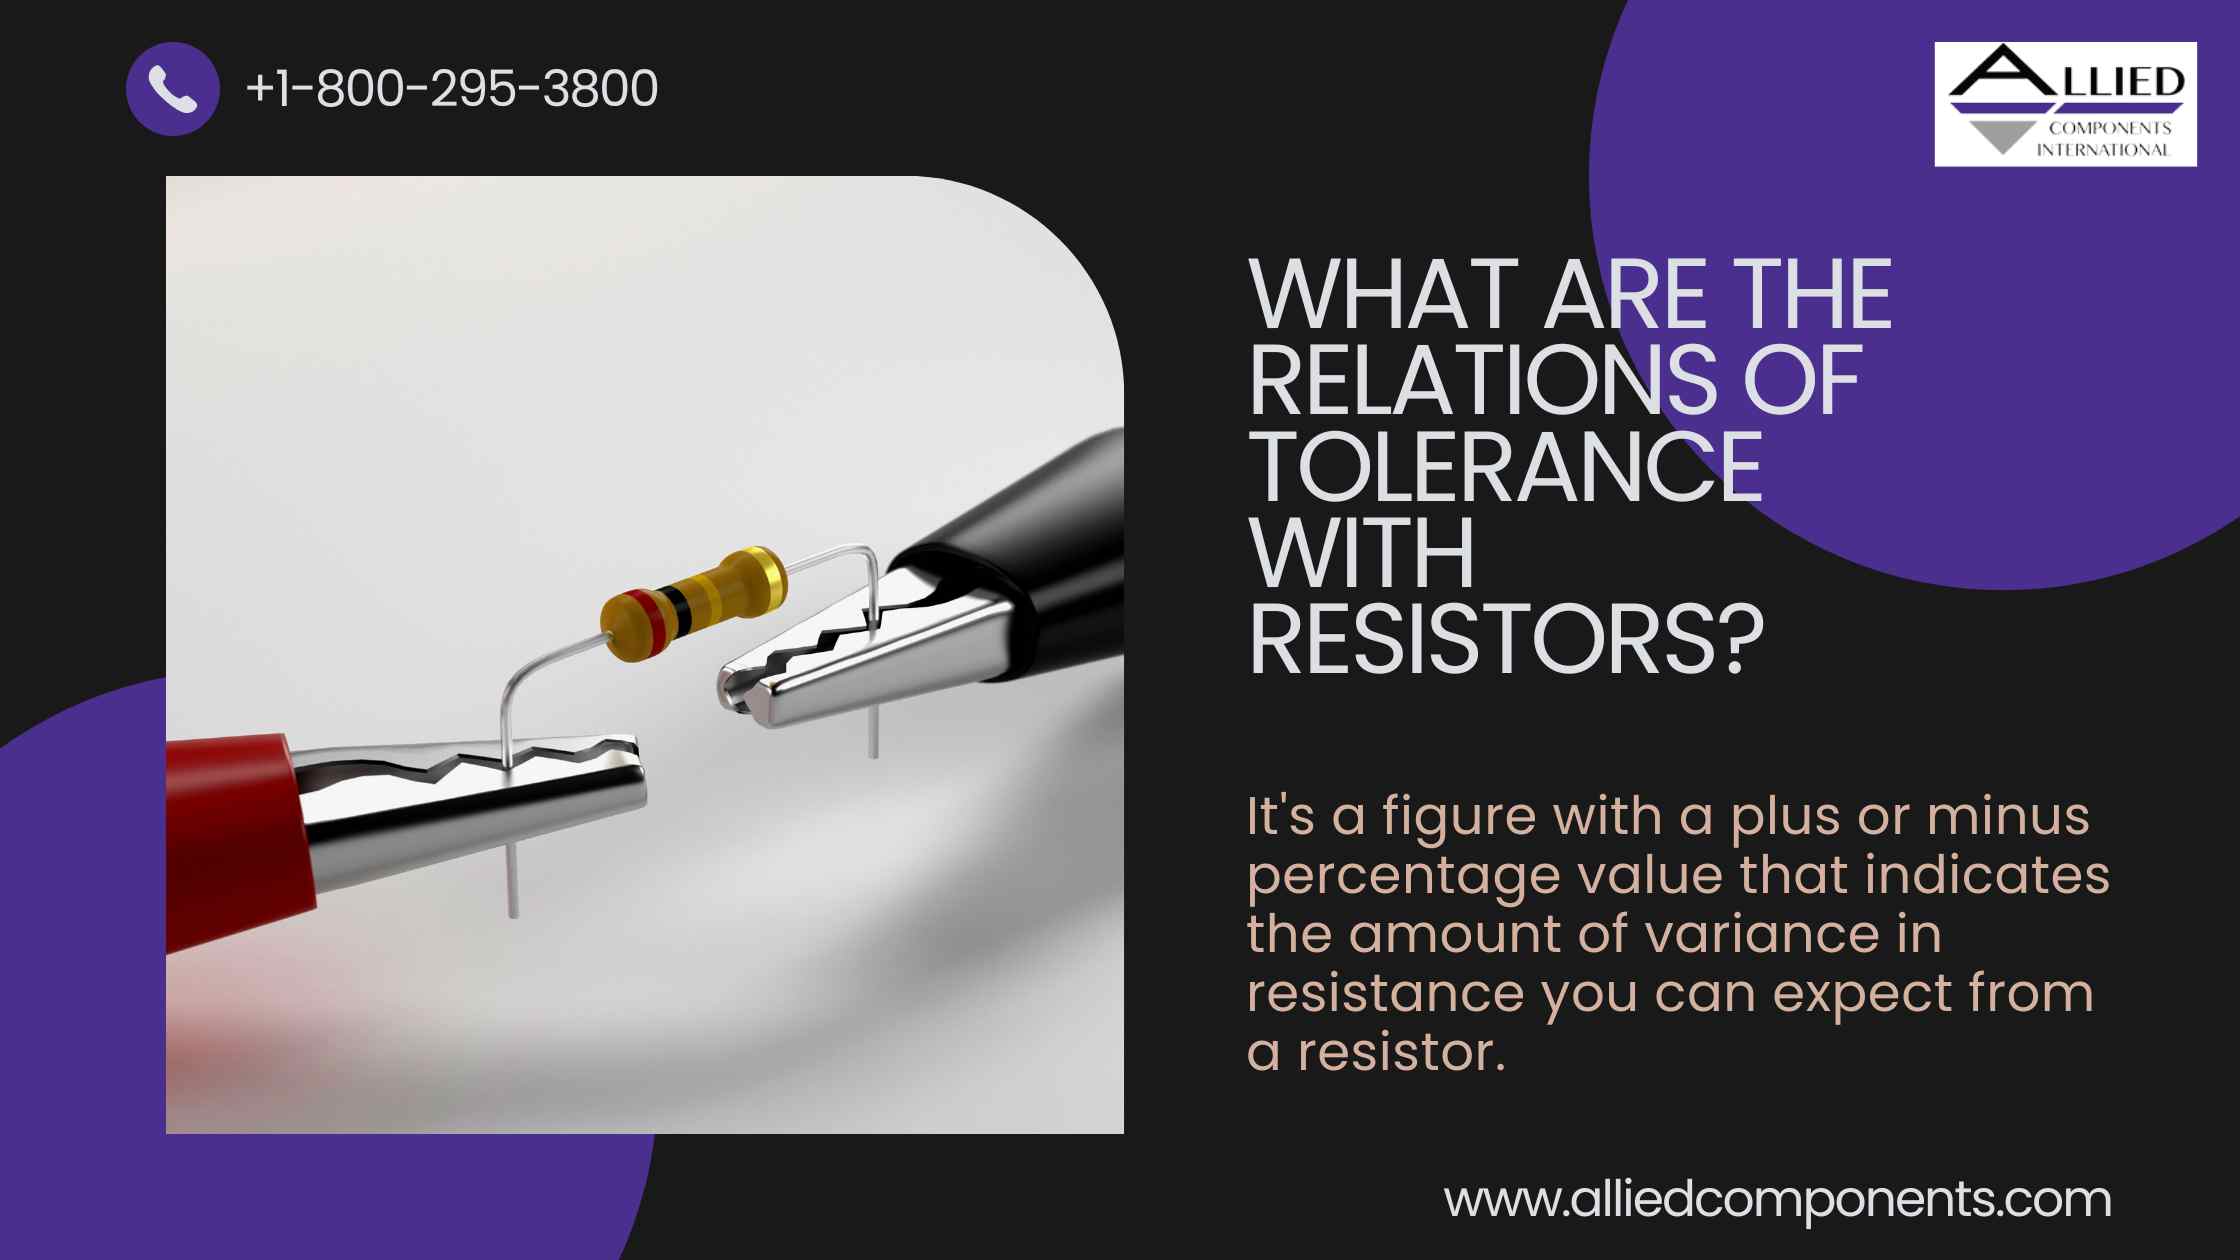 What Are the Relations of Tolerance with Resistors?